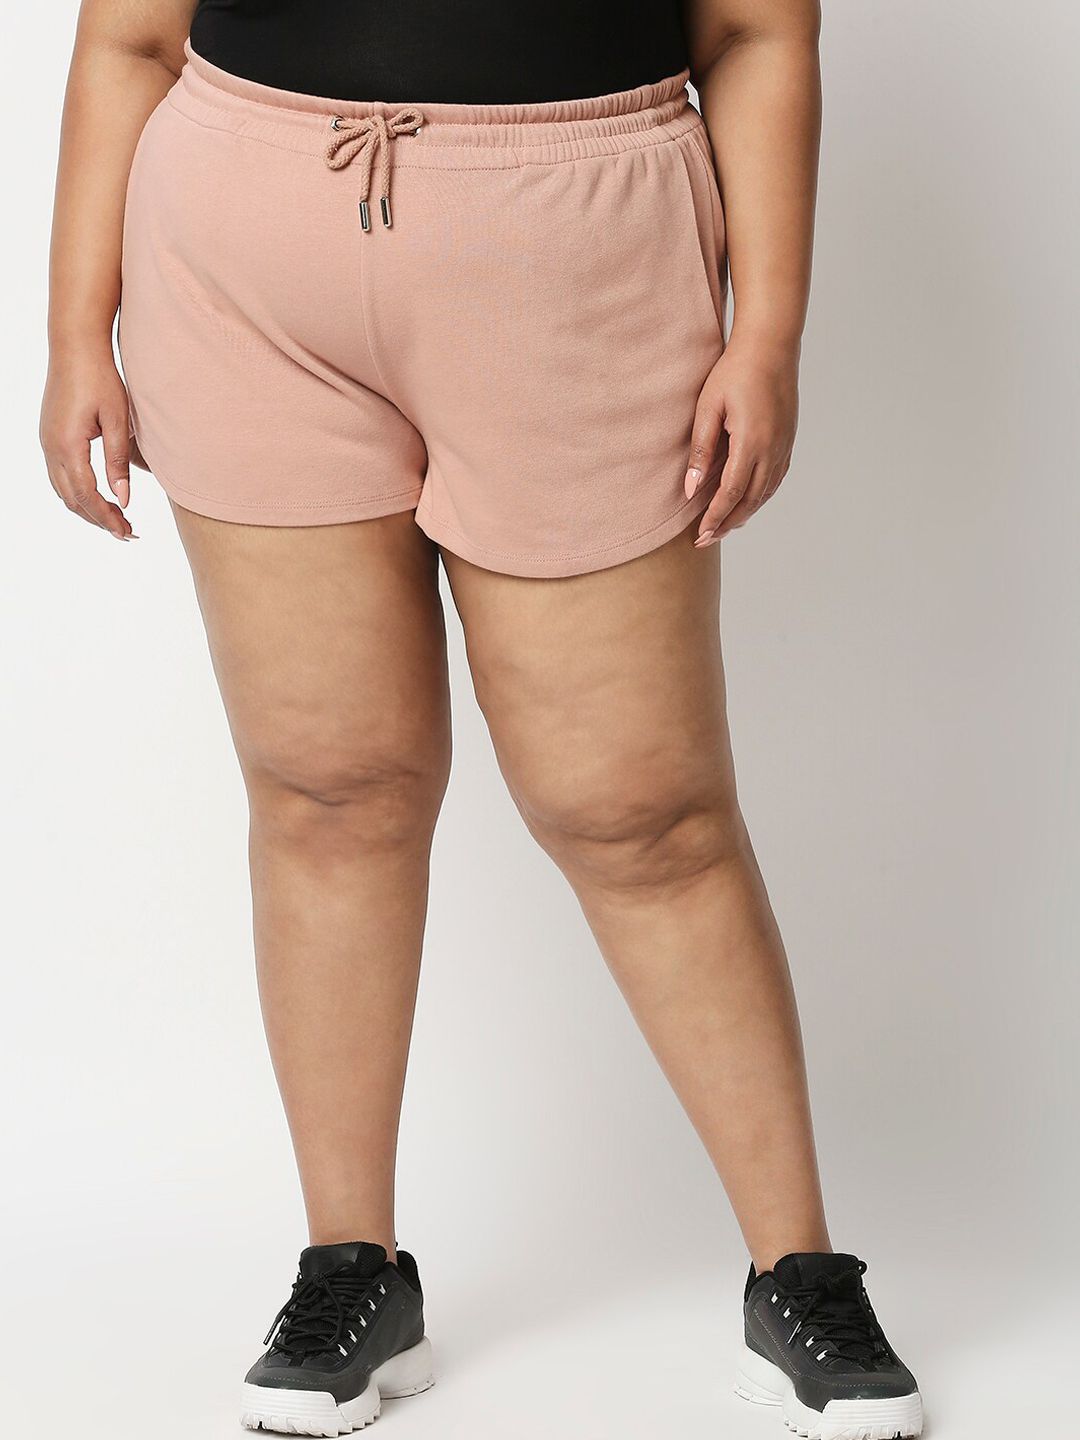 20Dresses Women Plus Size Pink Sports Shorts Price in India